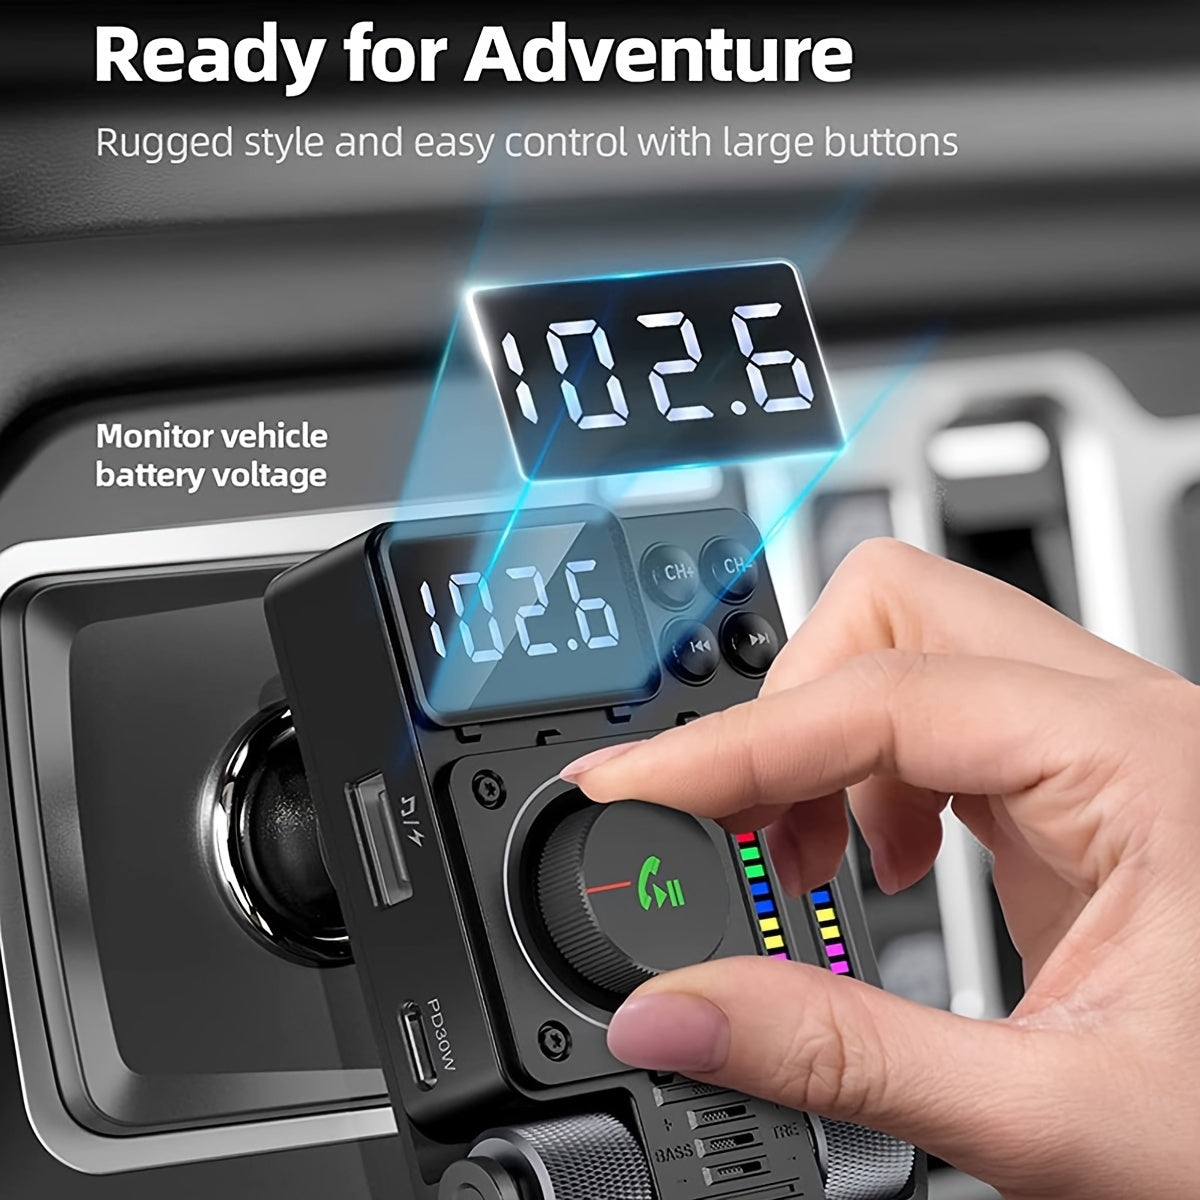 Upgrade Your Car Audio System With JaJaBor's FM Transmitter - Treble & Bass Adjustable, 30W Fast Charging, & Hands-Free Wireless Kit!